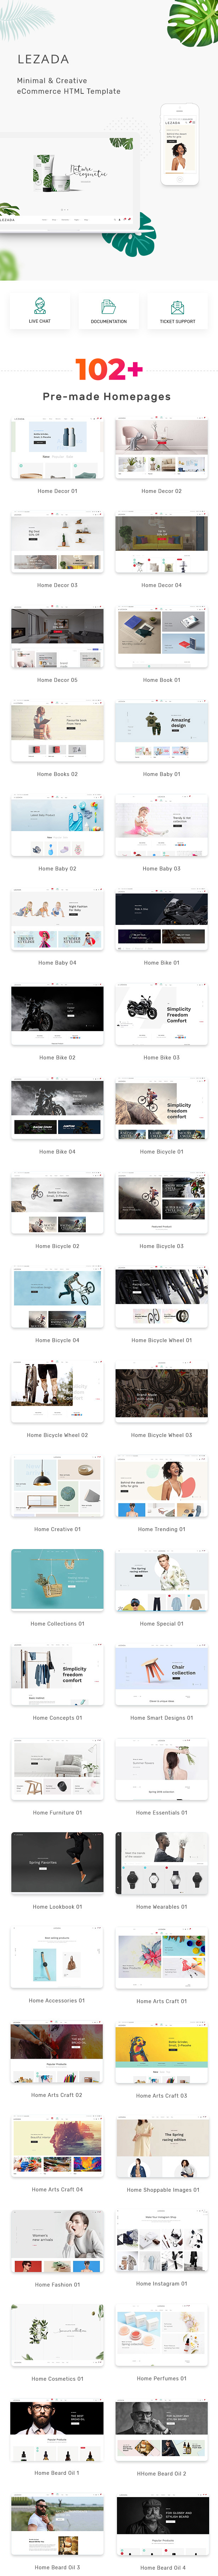 ecommerce template